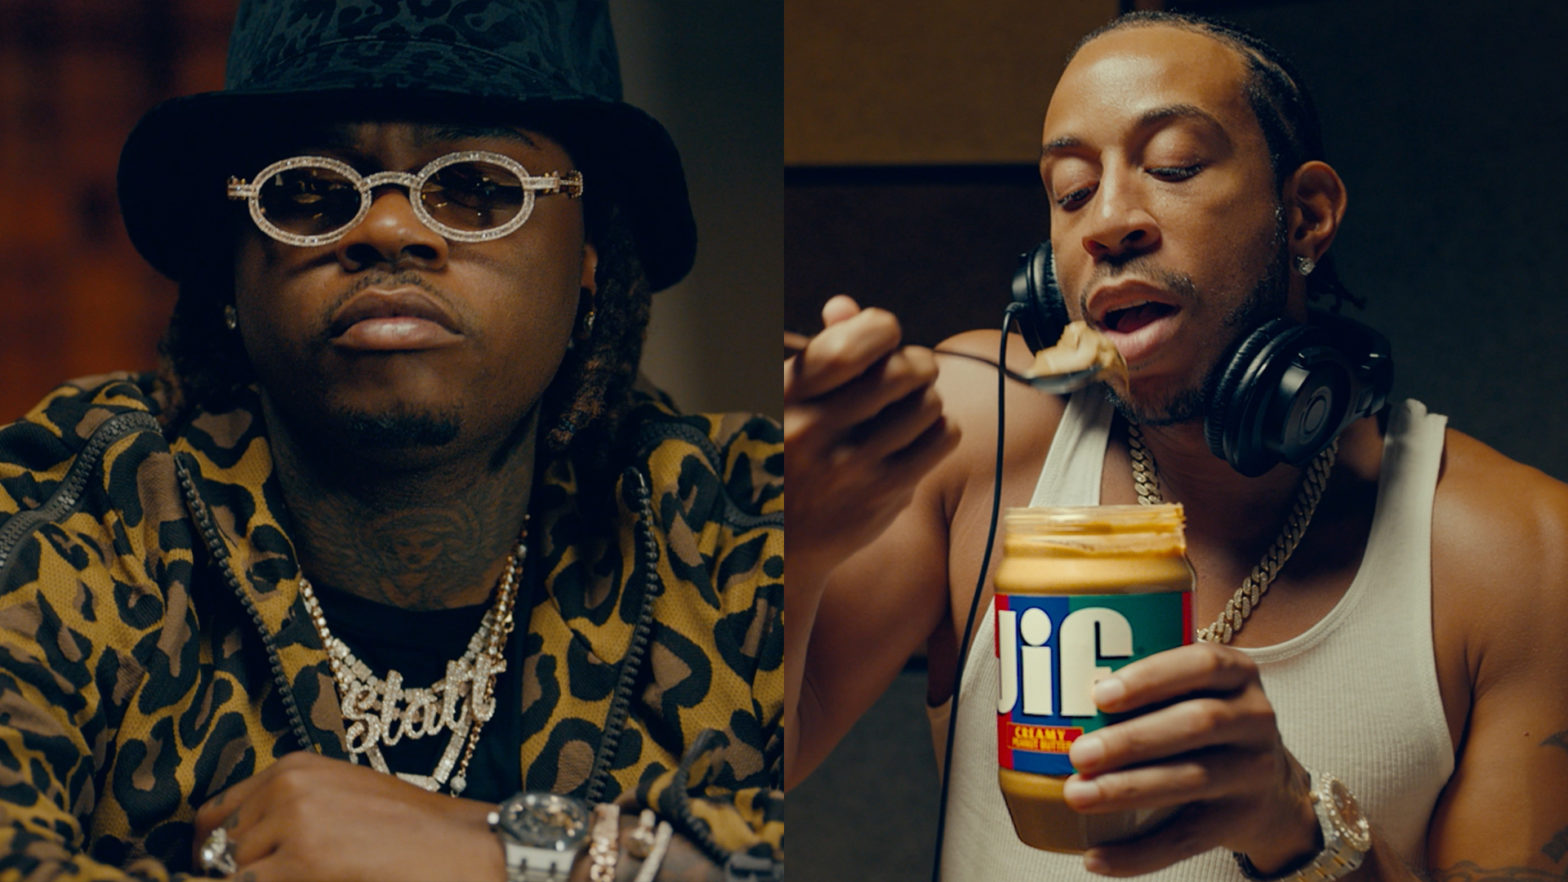 Ludacris Rocks Iced Out Peanut Butter Chain In New 'That Jif’ing Good' Campaign With Gunna